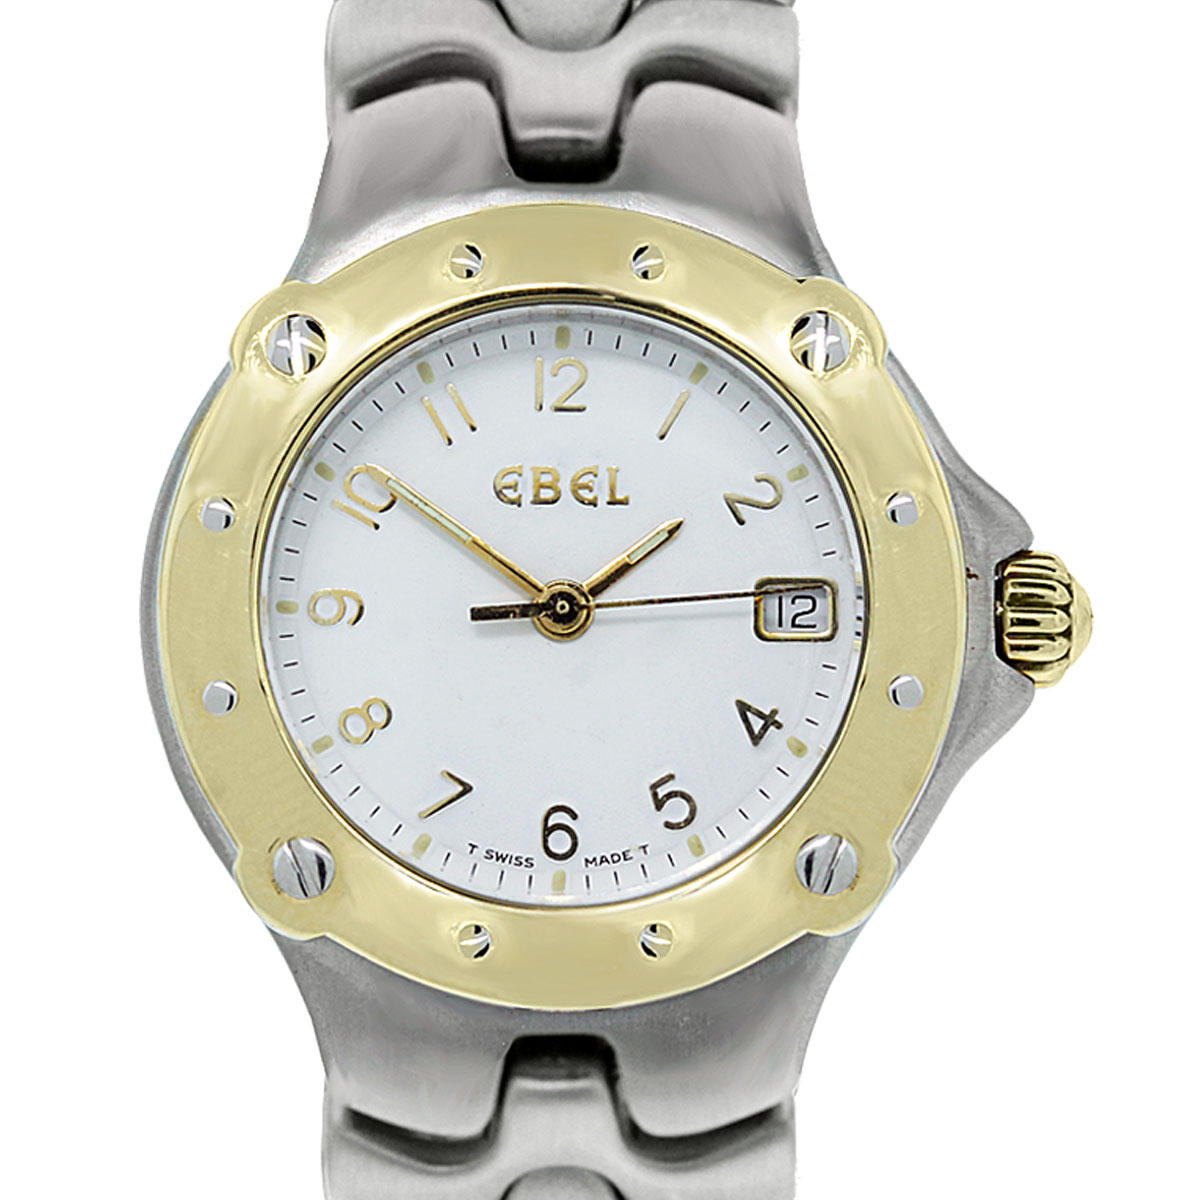 1134901 Ebel 1911 Chronograph 2 Tone | Essential Watches